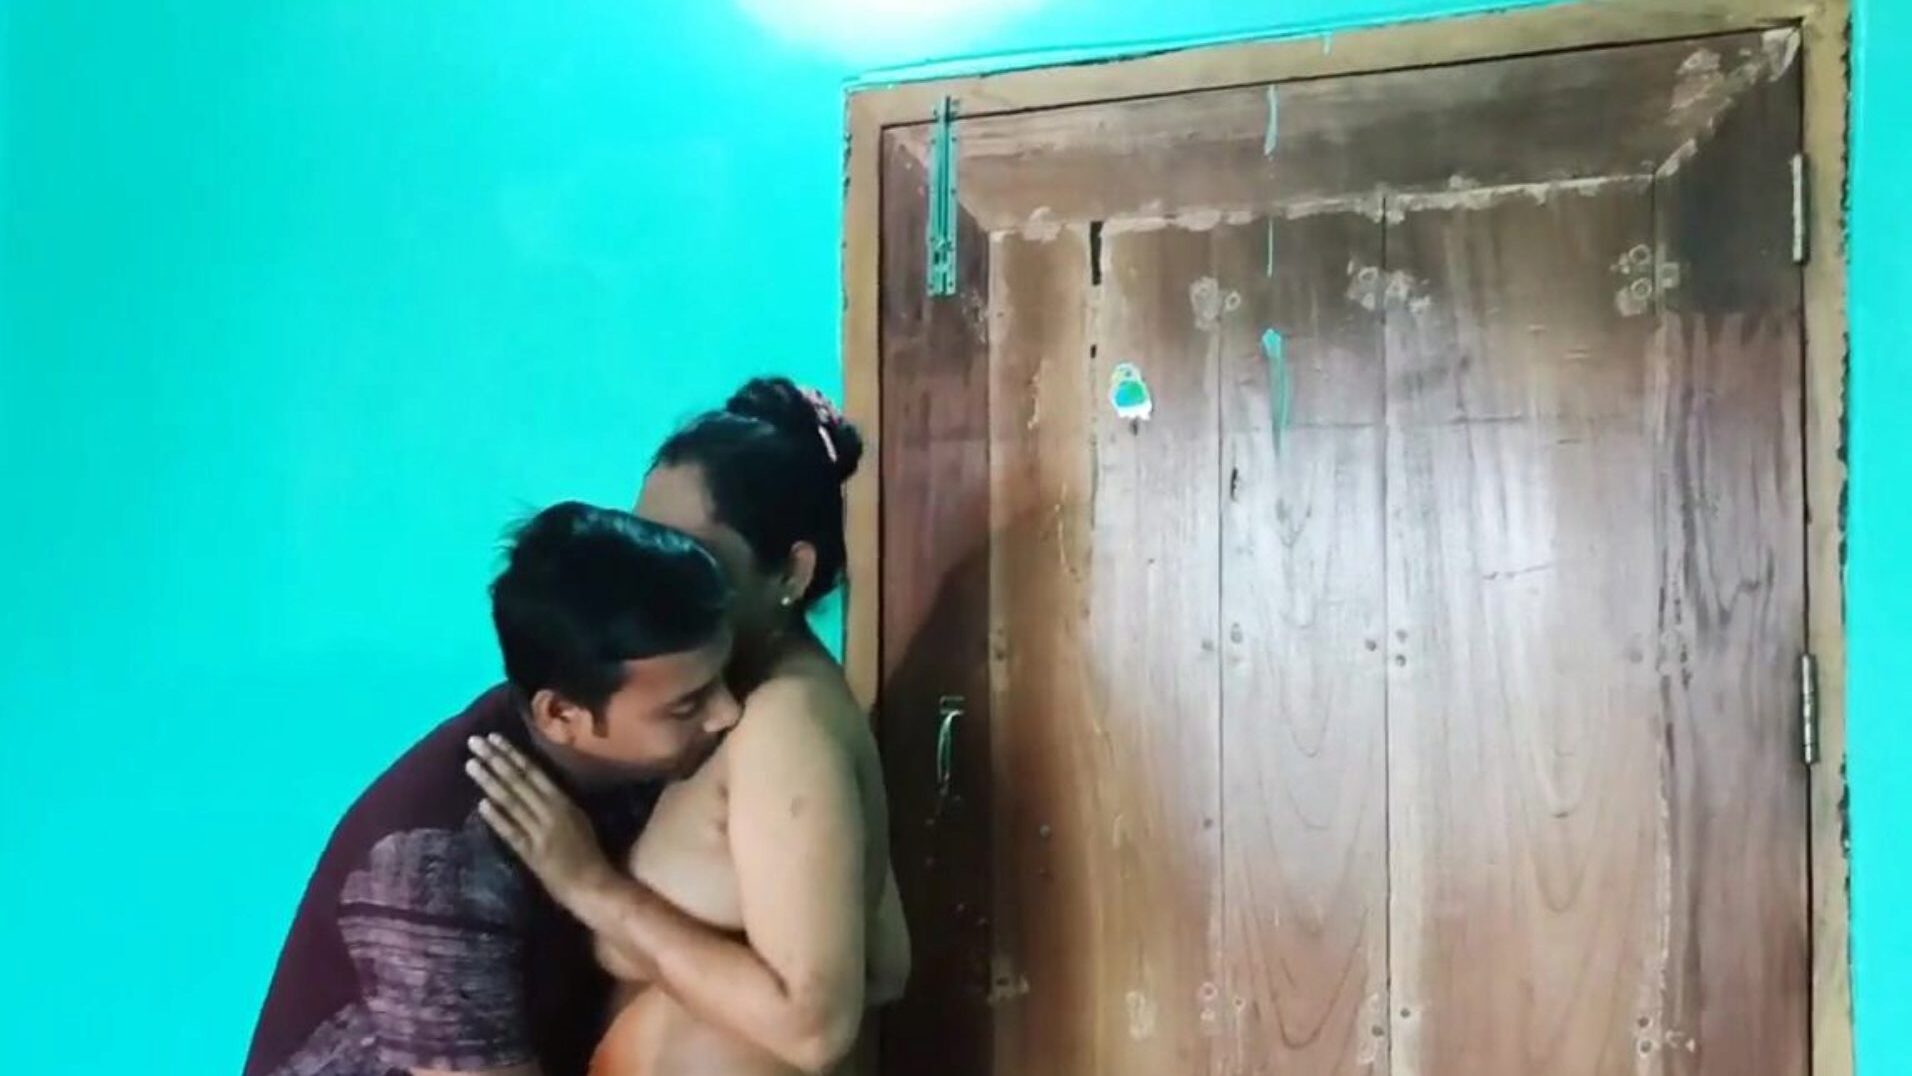 Desi Bengali Sex Video Naked, Free Asian Porn 6c: xHamster Watch Desi Bengali Sex Video Naked movie on xHamster, the thickest HD hookup tube web page with tons of free-for-all Asian Xxn Sex & Anal porn movies